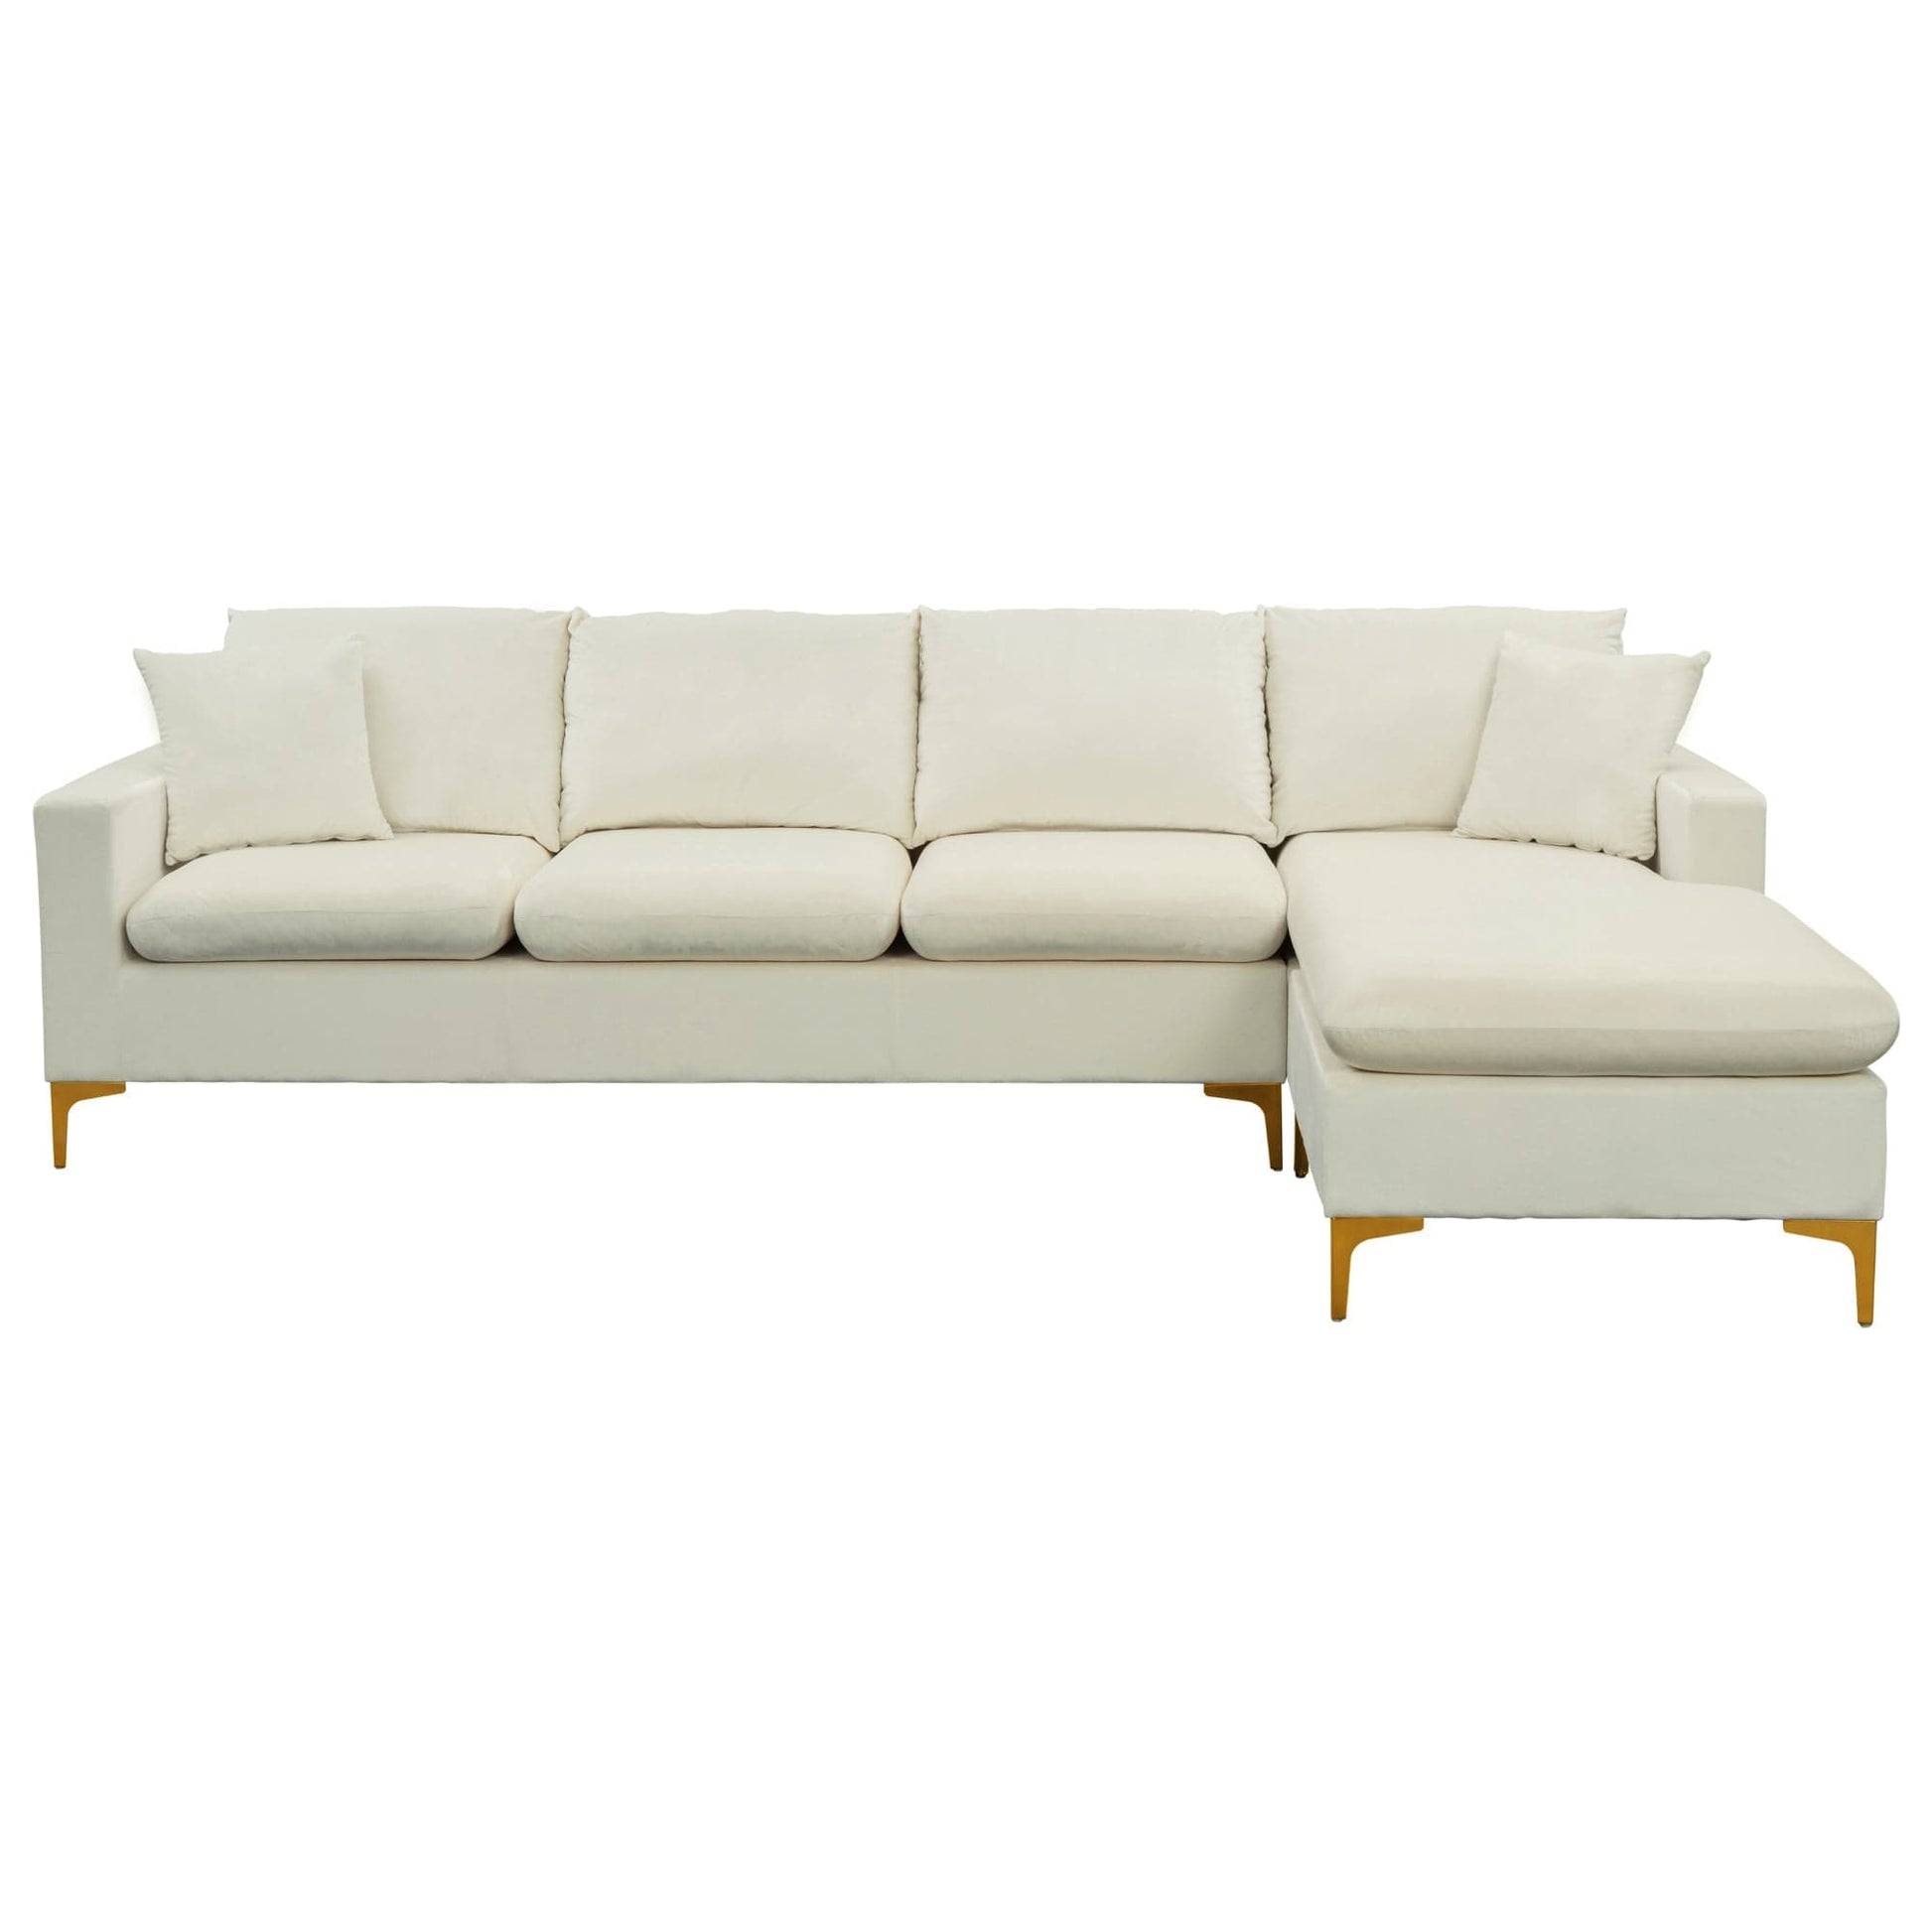 1st Choice Furniture Direct Sectional Sofa & Ottoman 1st Choice Cream White Sectional Sofa Set with Ottoman and Pillows